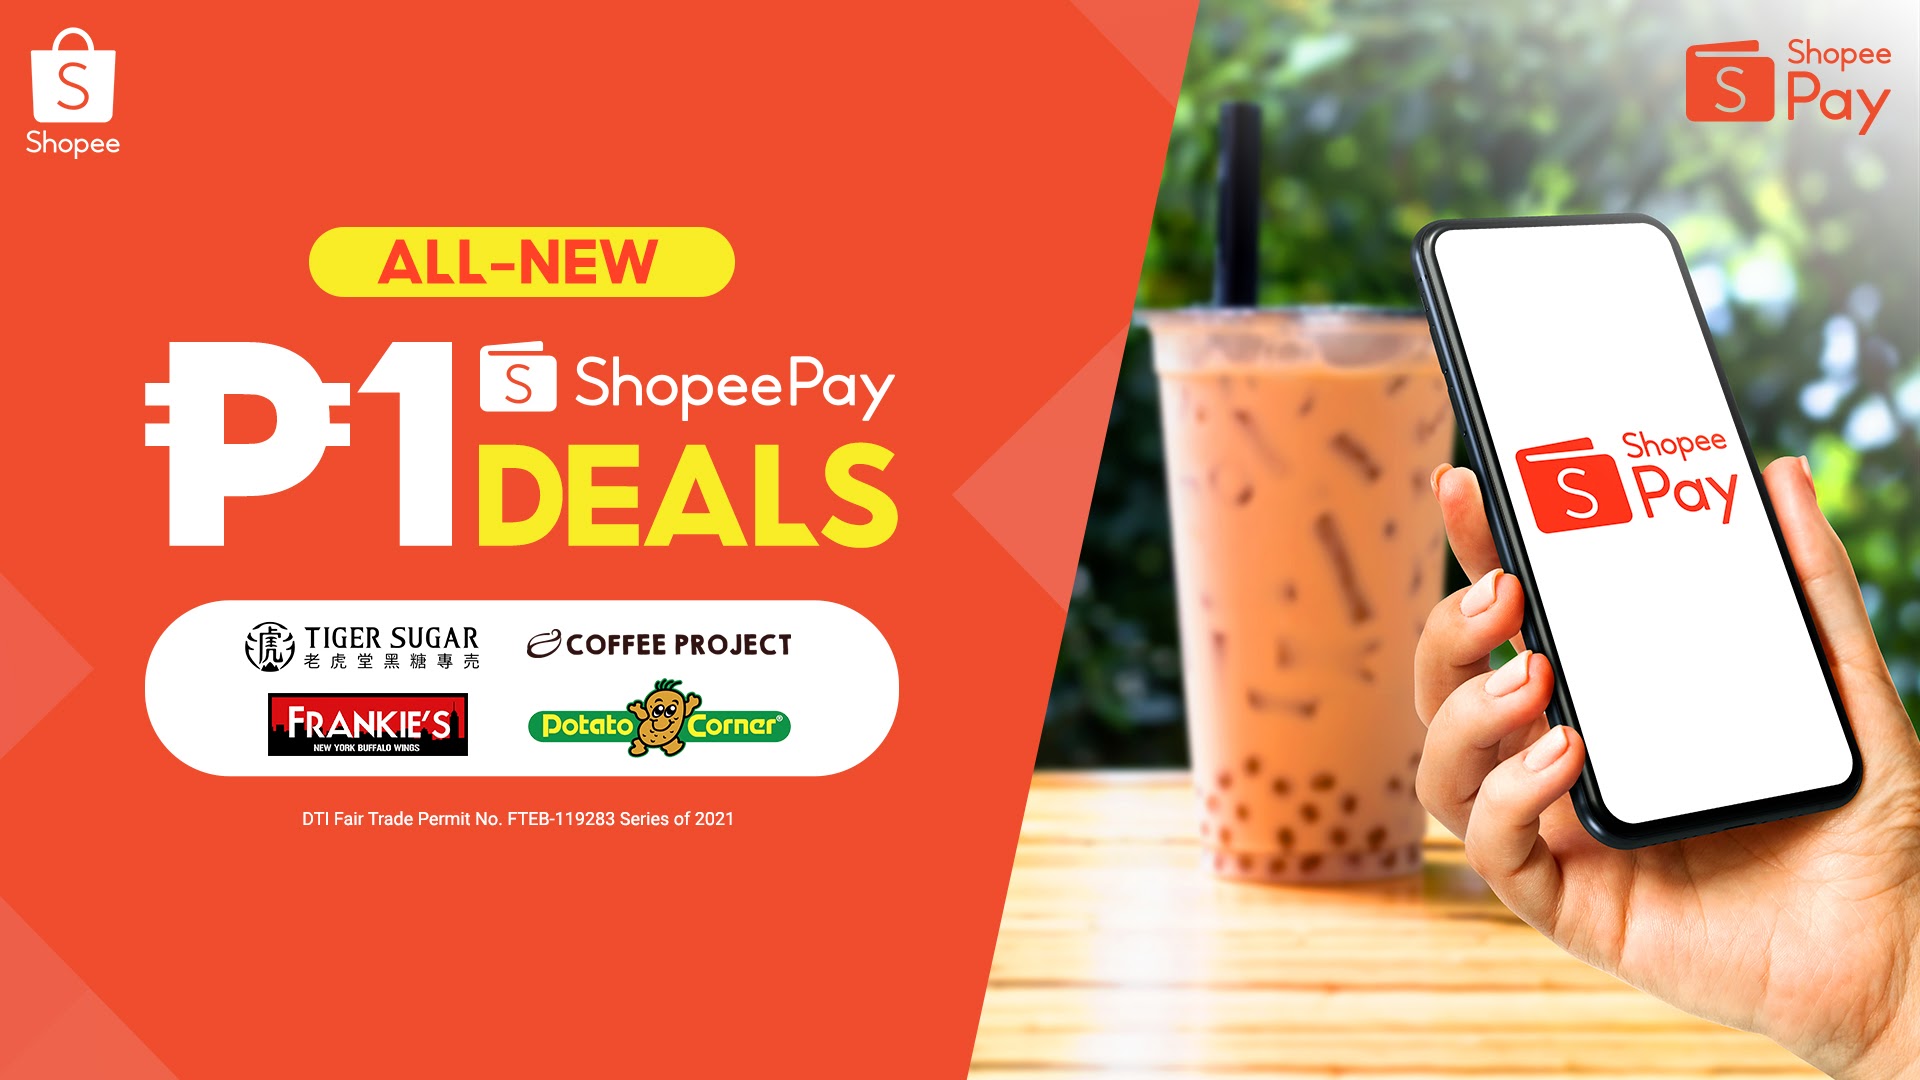 Satisfy Your Comfort Food Cravings with ShopeePay PHP1 Deals